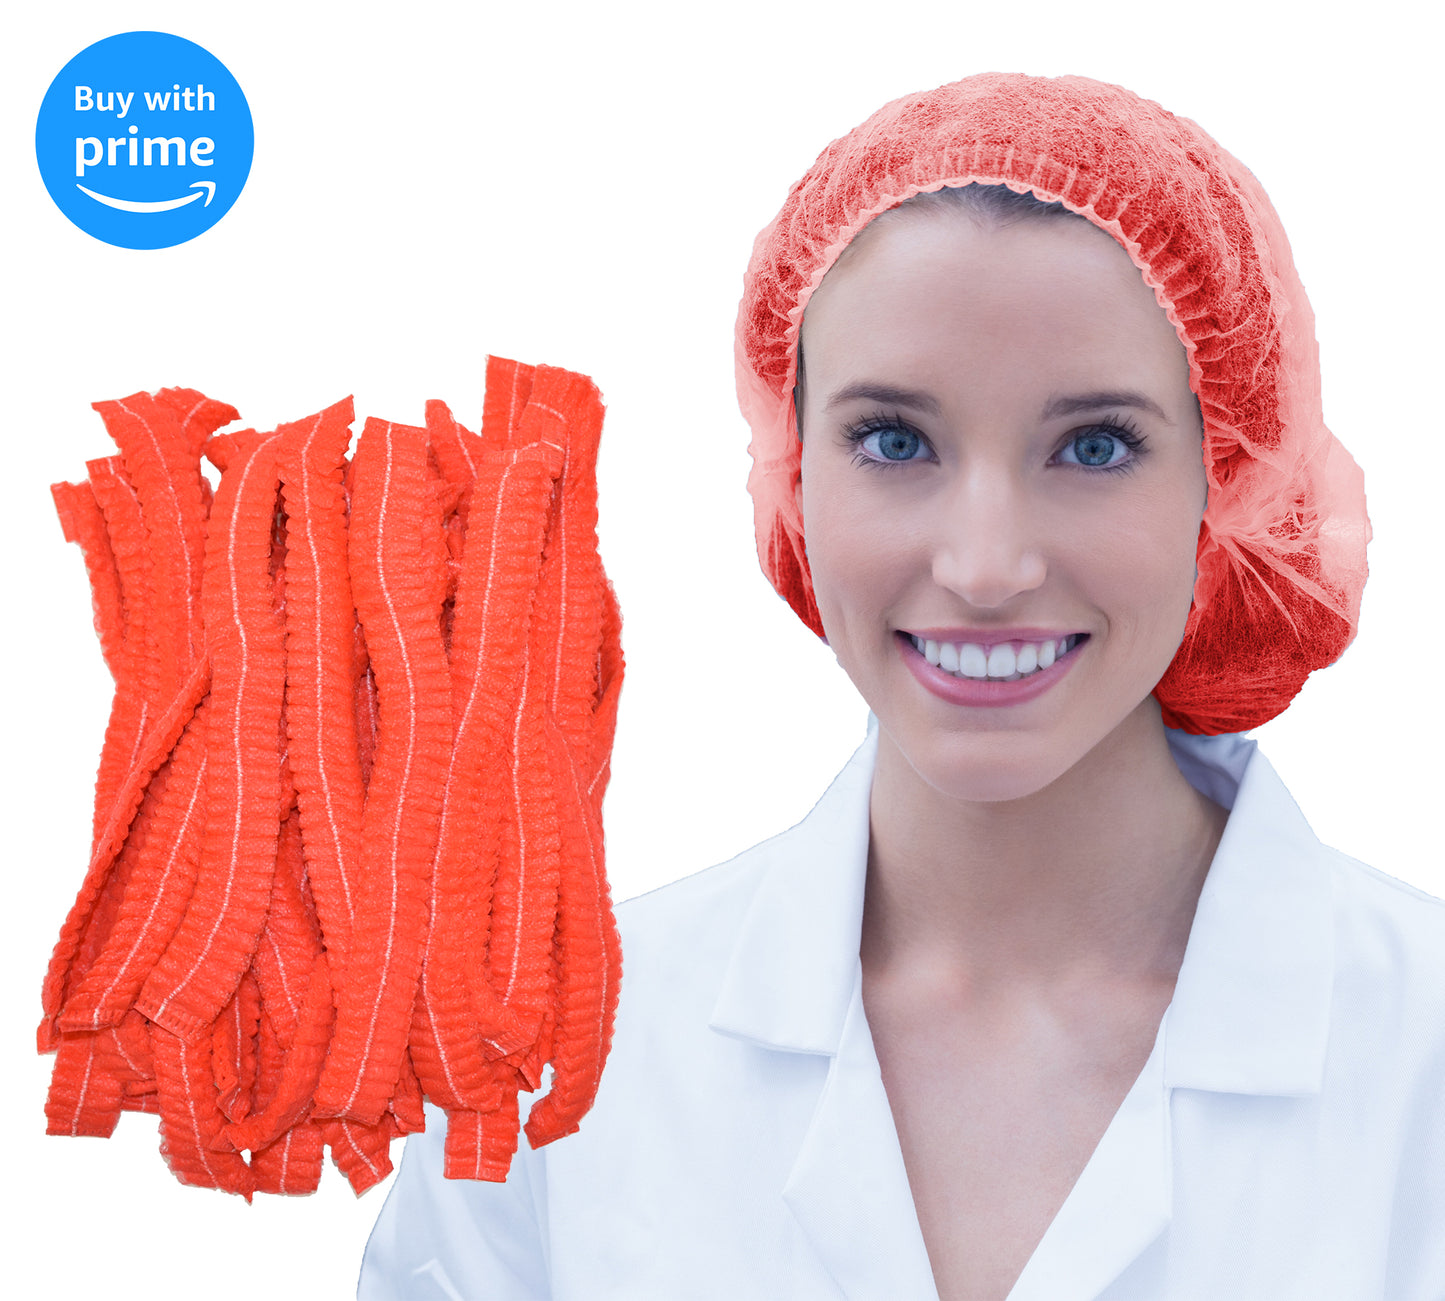 24" Disposable Bouffant Hair Nets, High Quality Breathable Material, Used in Food Service, Laboratories, Manufacturing, Beauty Salon - 100 Pieces